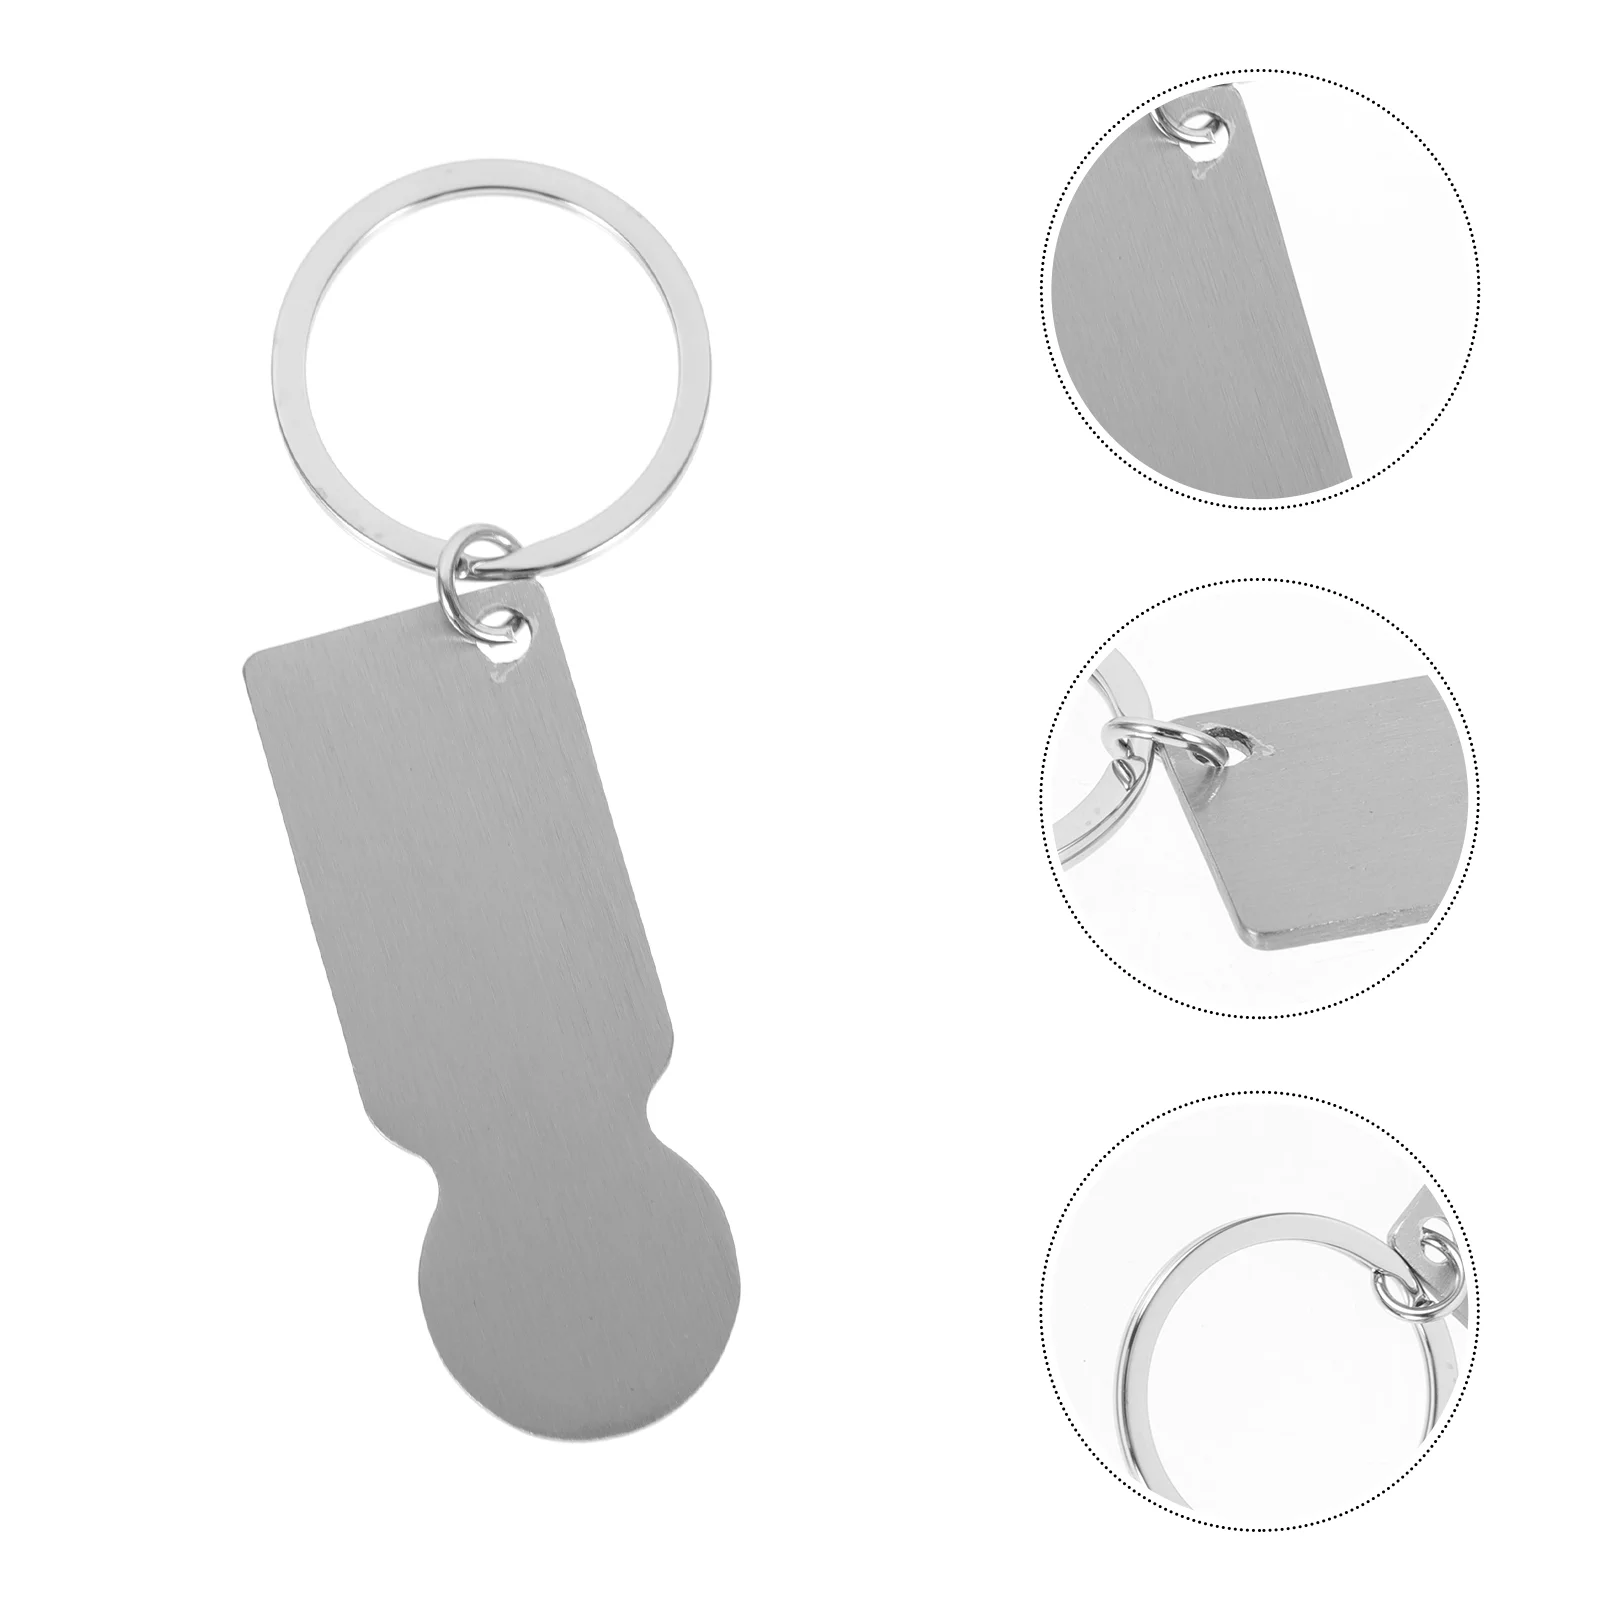 

Trolley Key Shopping Token Cart Keychainholder Tokens Keyring Compact Charms Grocery Supermarket Metal Ring Unlock Release